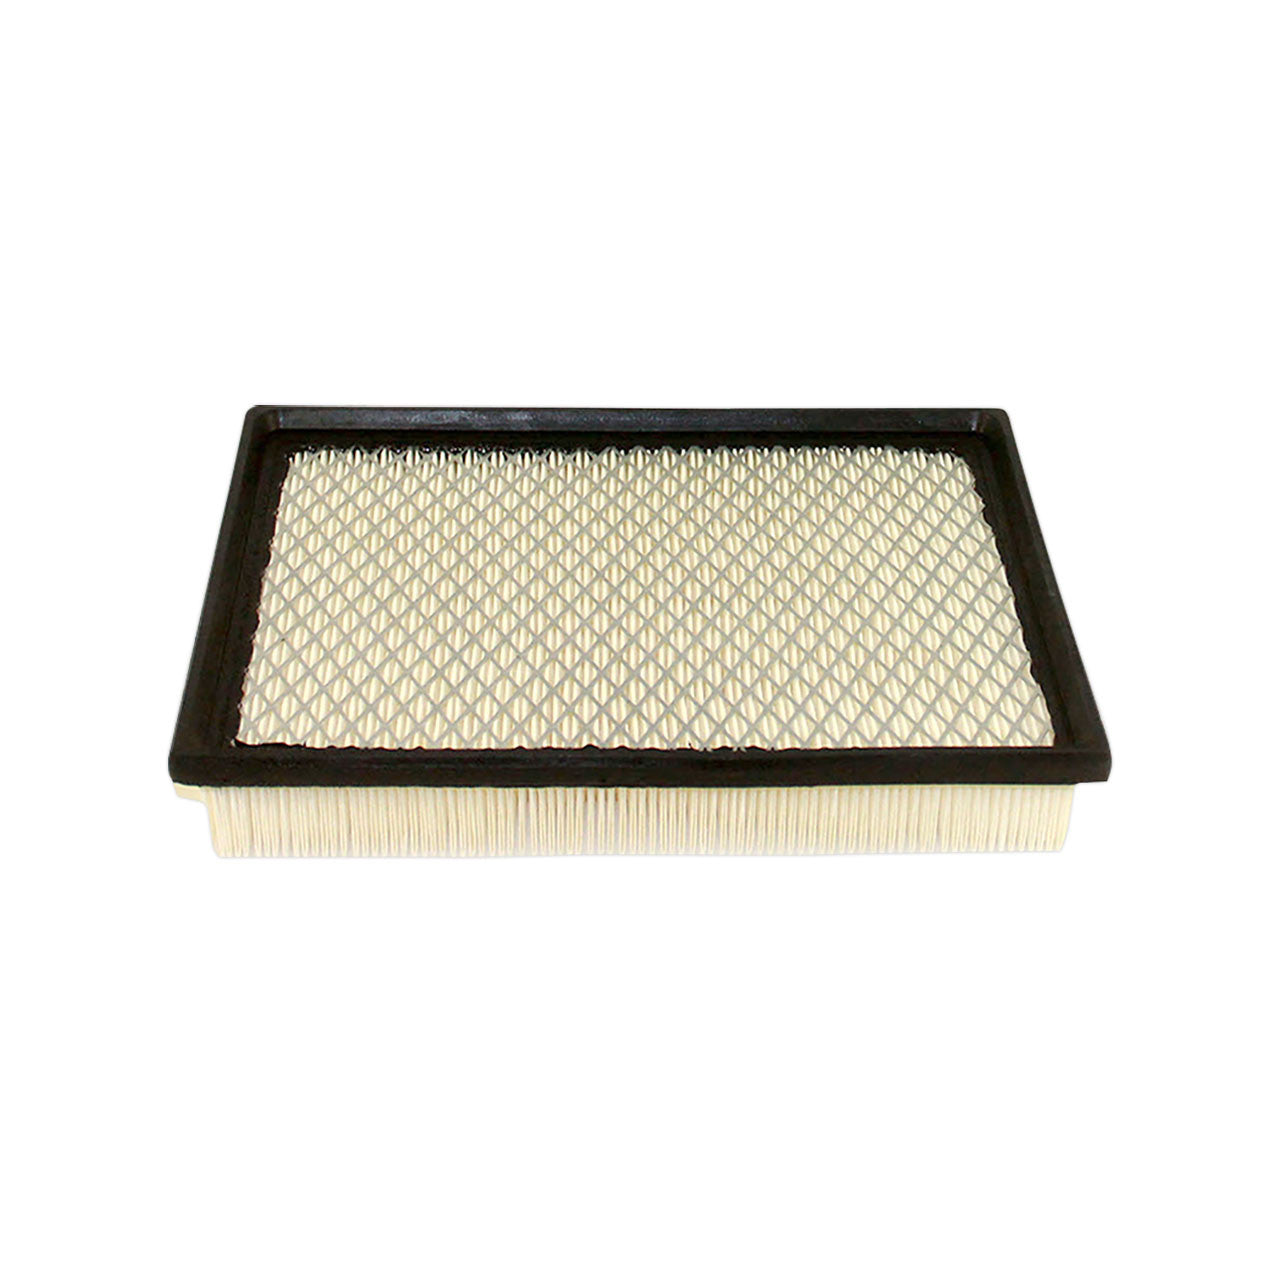 WA1118 Wesfil Air Filter for Chrysler (Cross Ref: A1594)